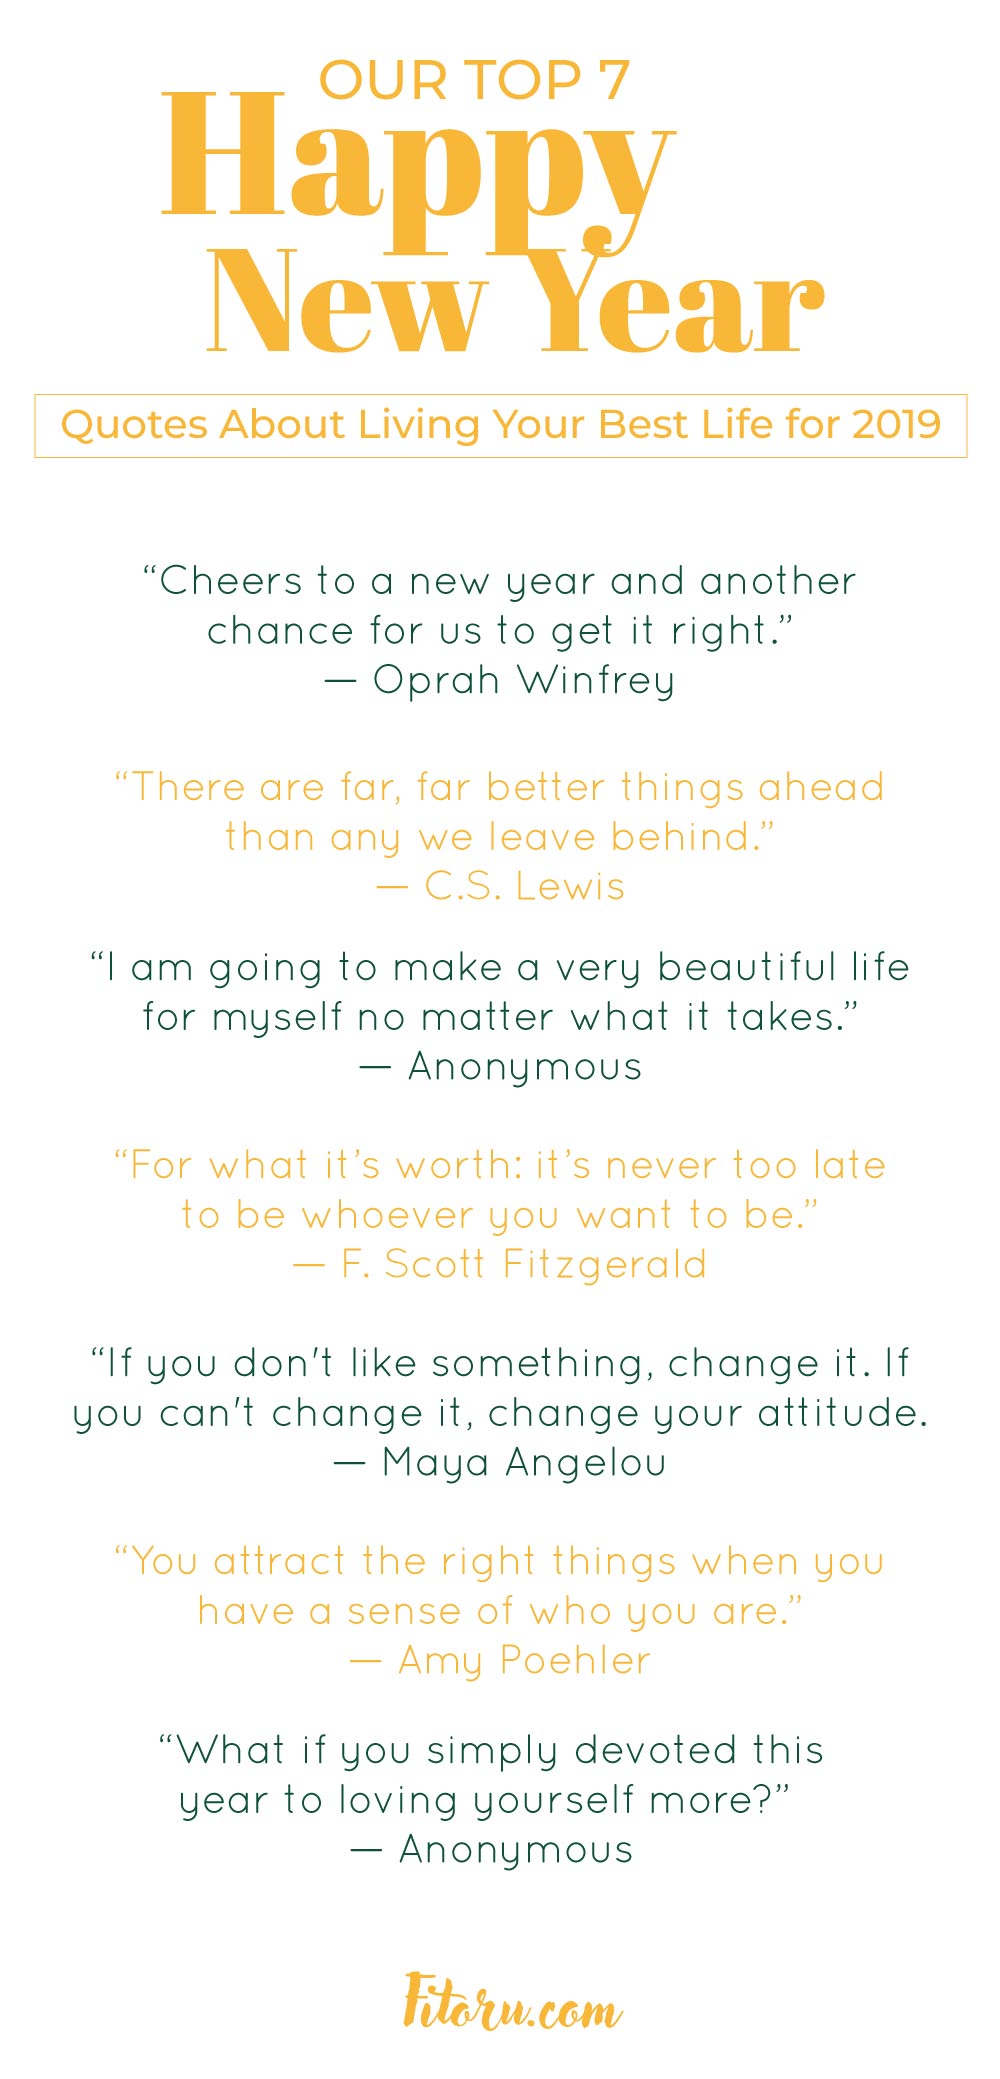 Our Top 7 Happy New Year Quotes About Living Your Best Life for 2019